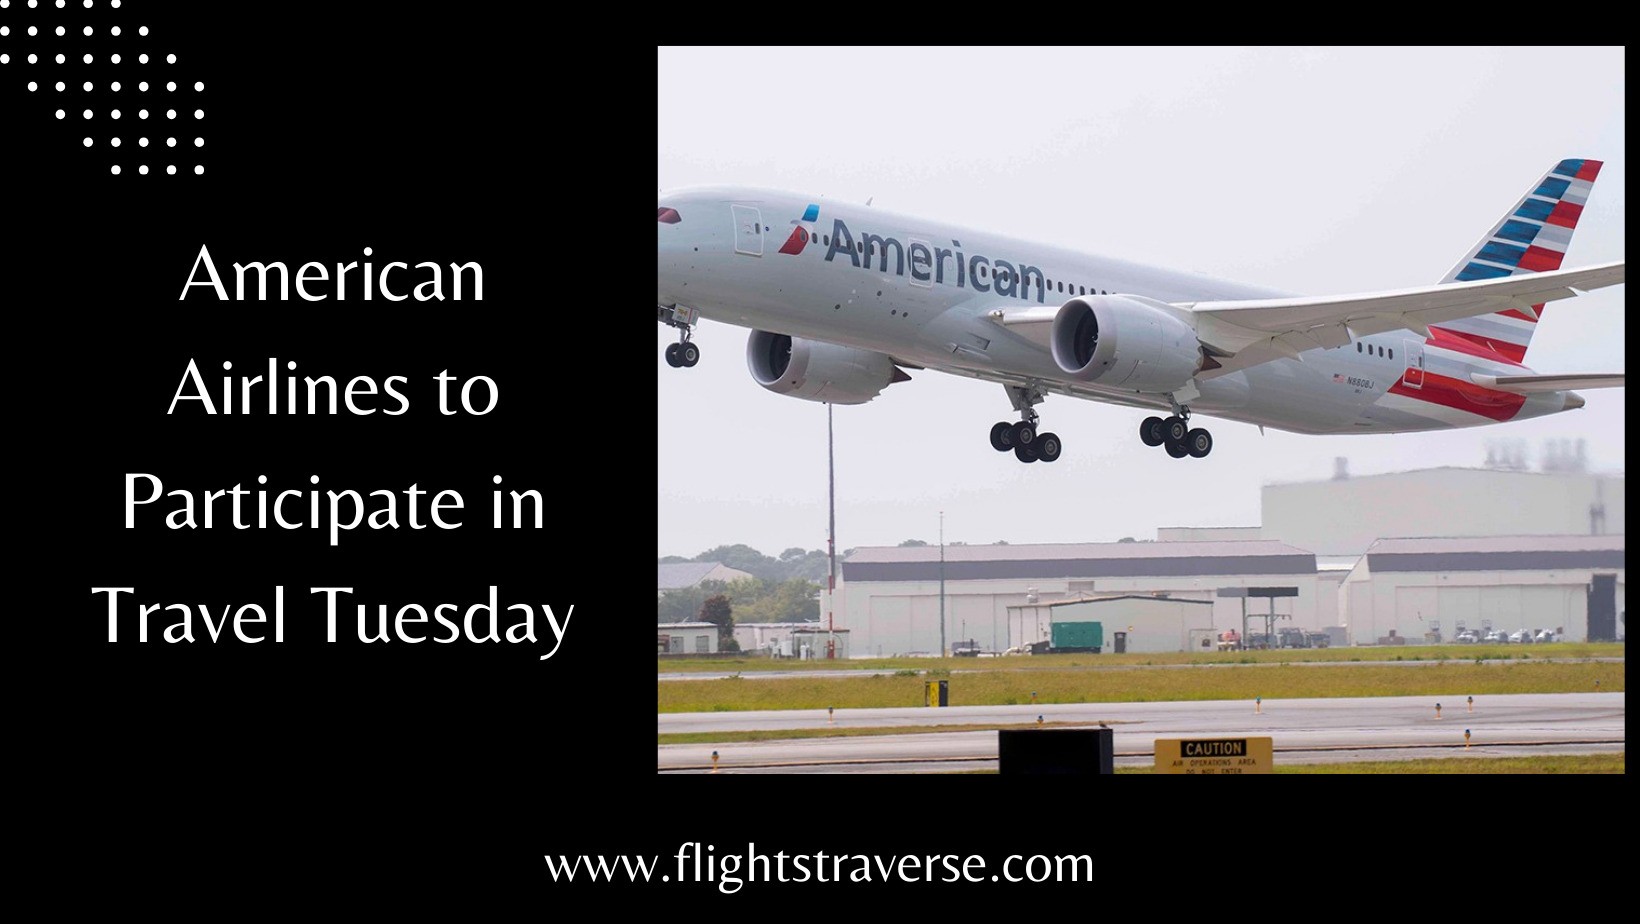 Does American Airlines participate in Travel Tuesday?